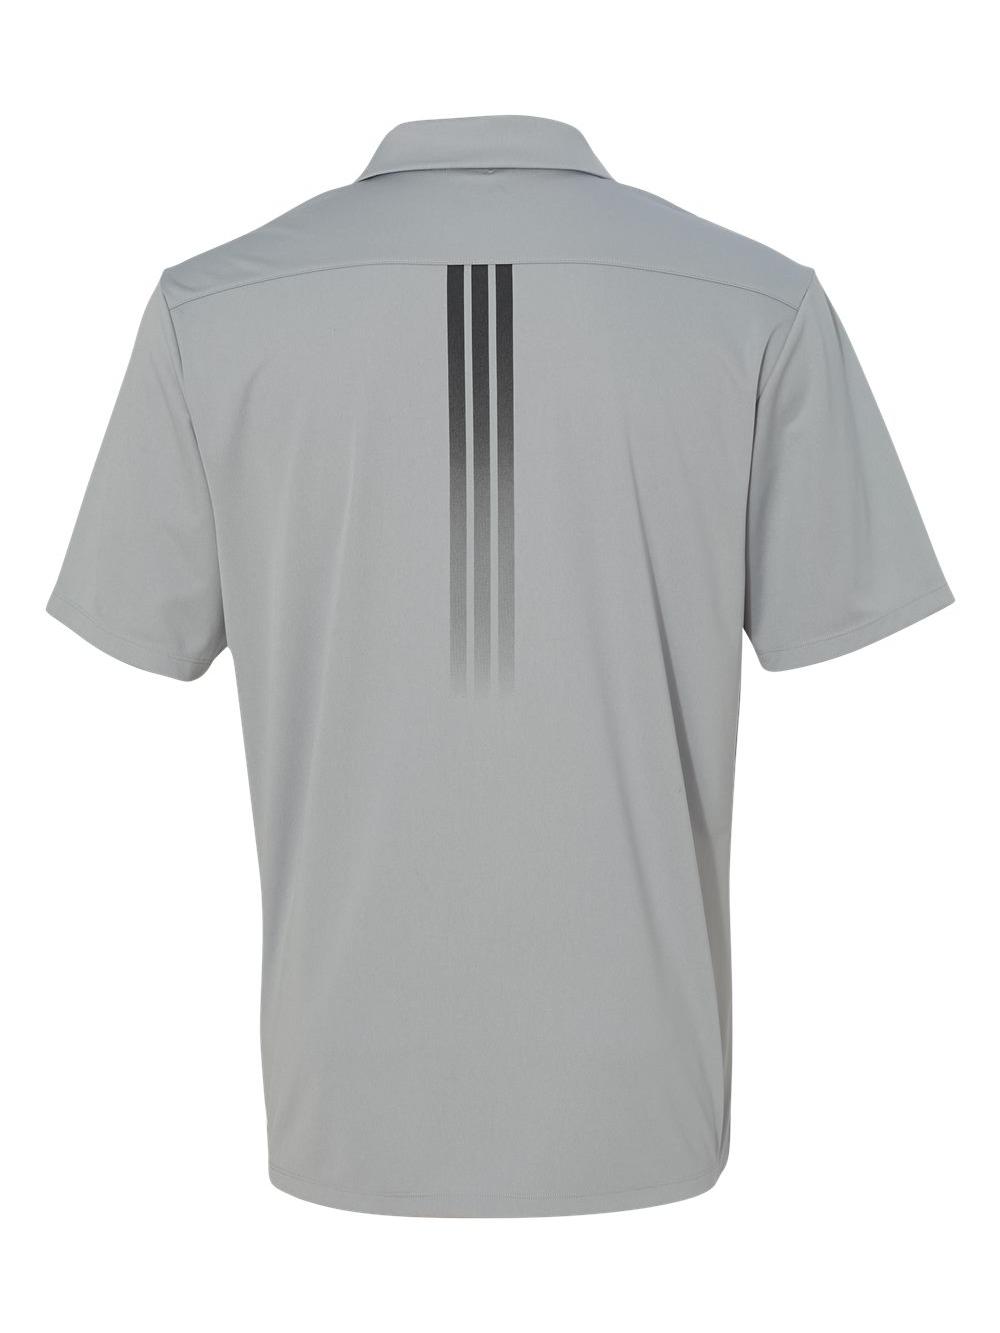 adidas Golf Men's climalite Texture Solid Polo - image 3 of 3